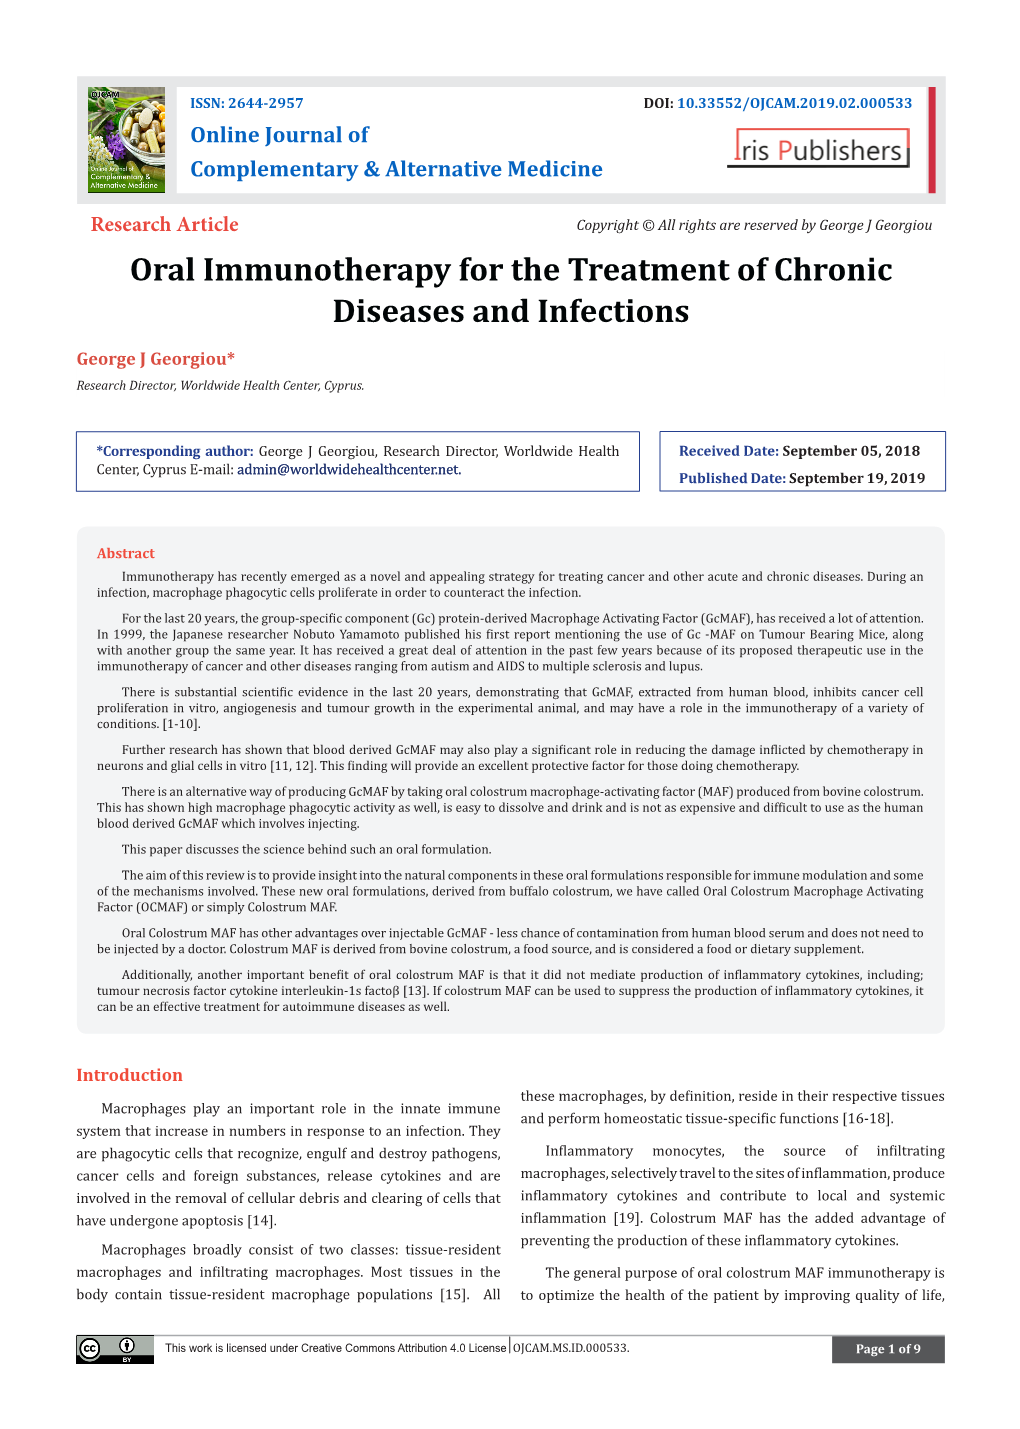 Oral Immunotherapy for the Treatment of Chronic Diseases and Infections